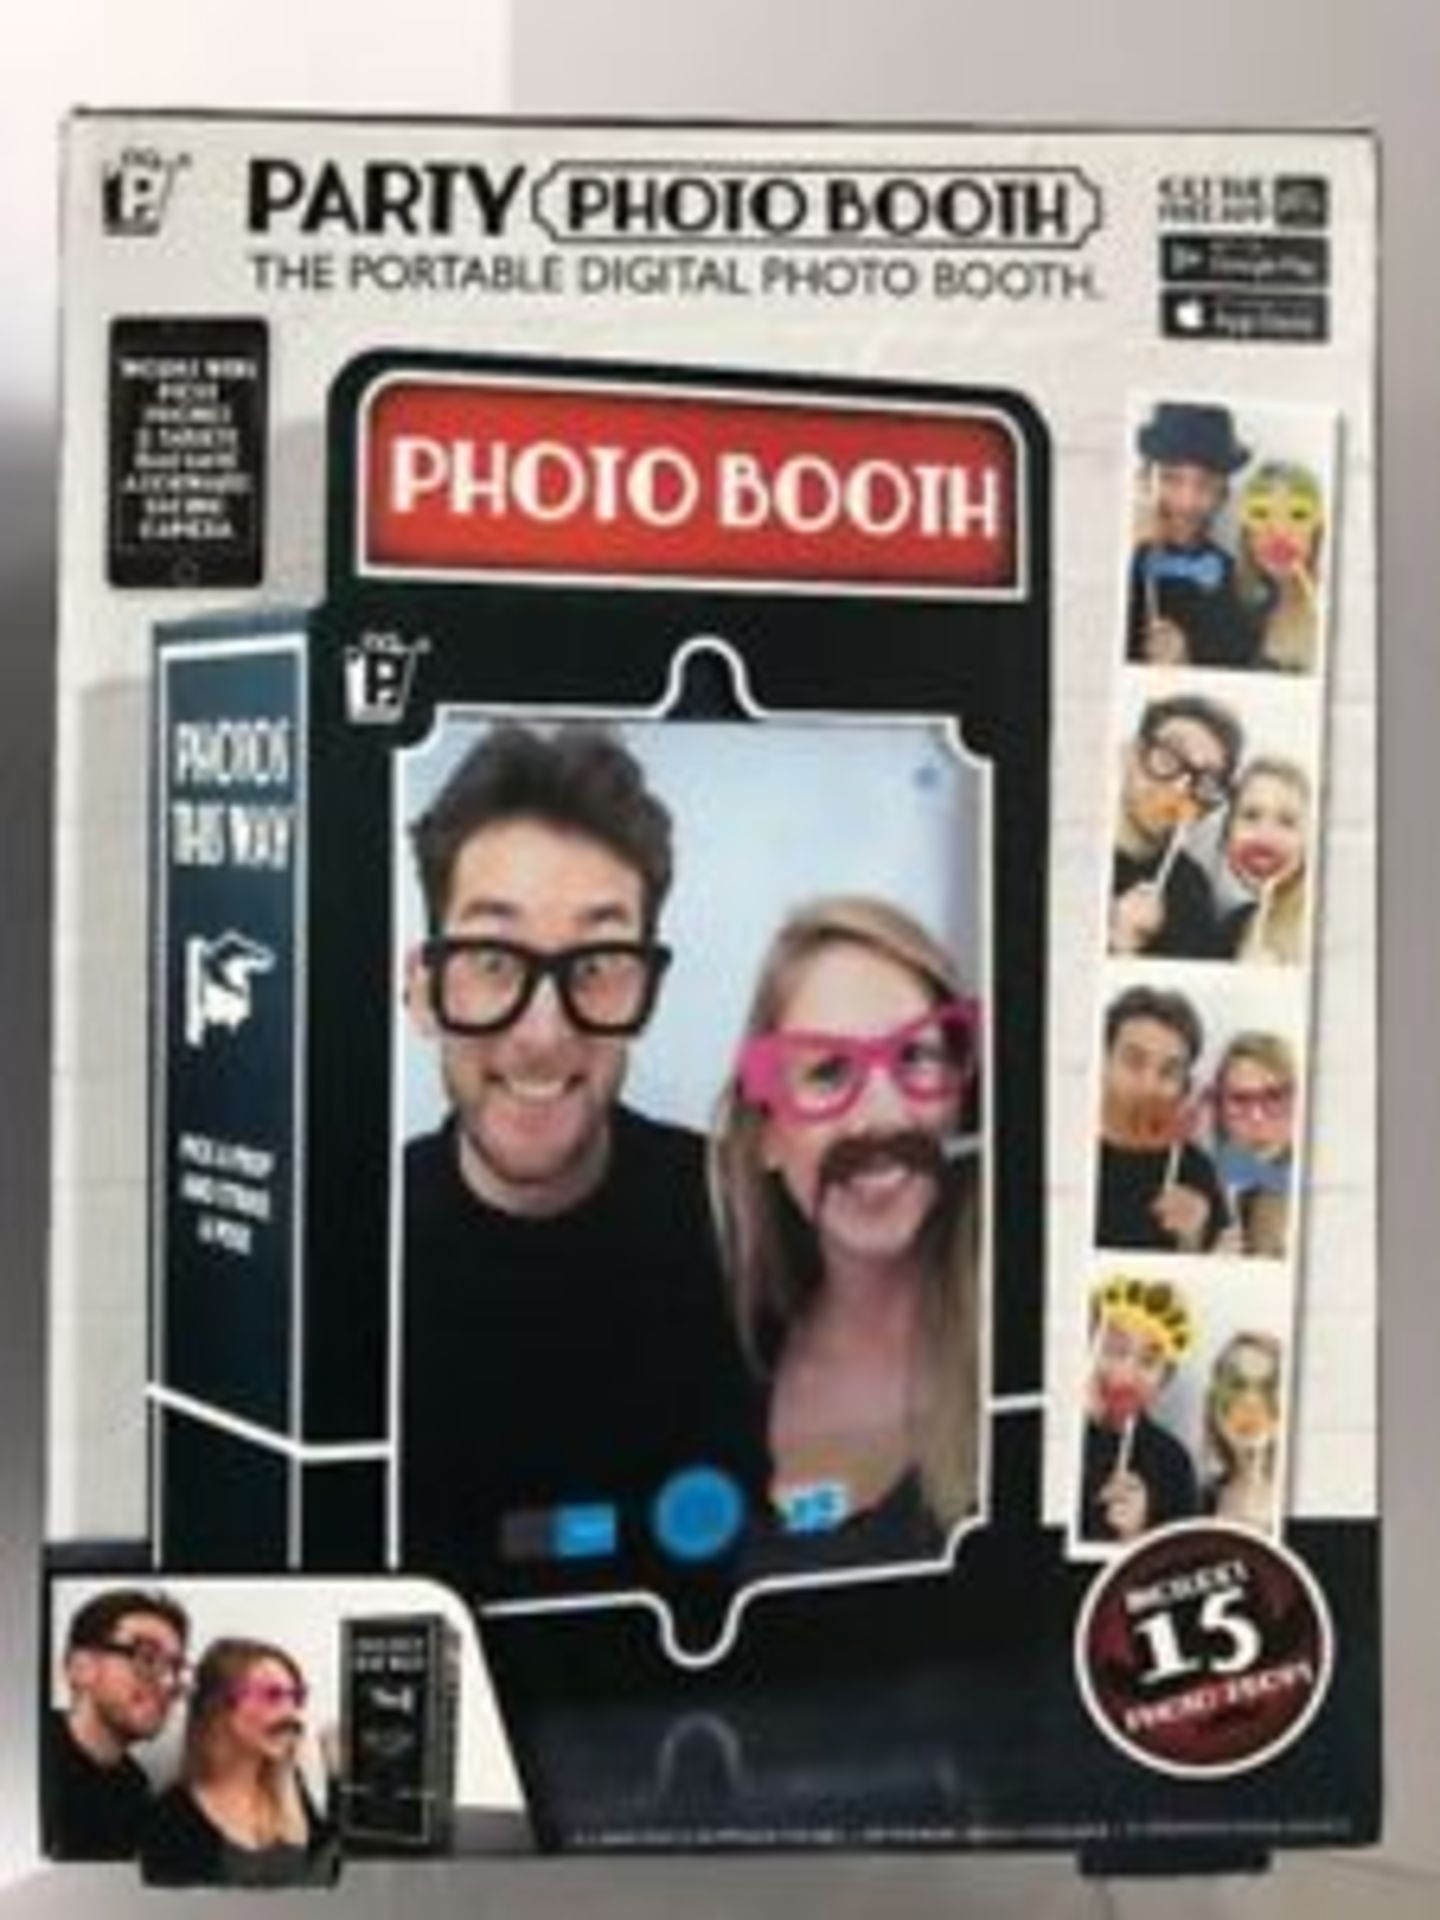 V Brand New Portable Party Photo Booth - with 15 Props ISP £11.99 (Ebay)